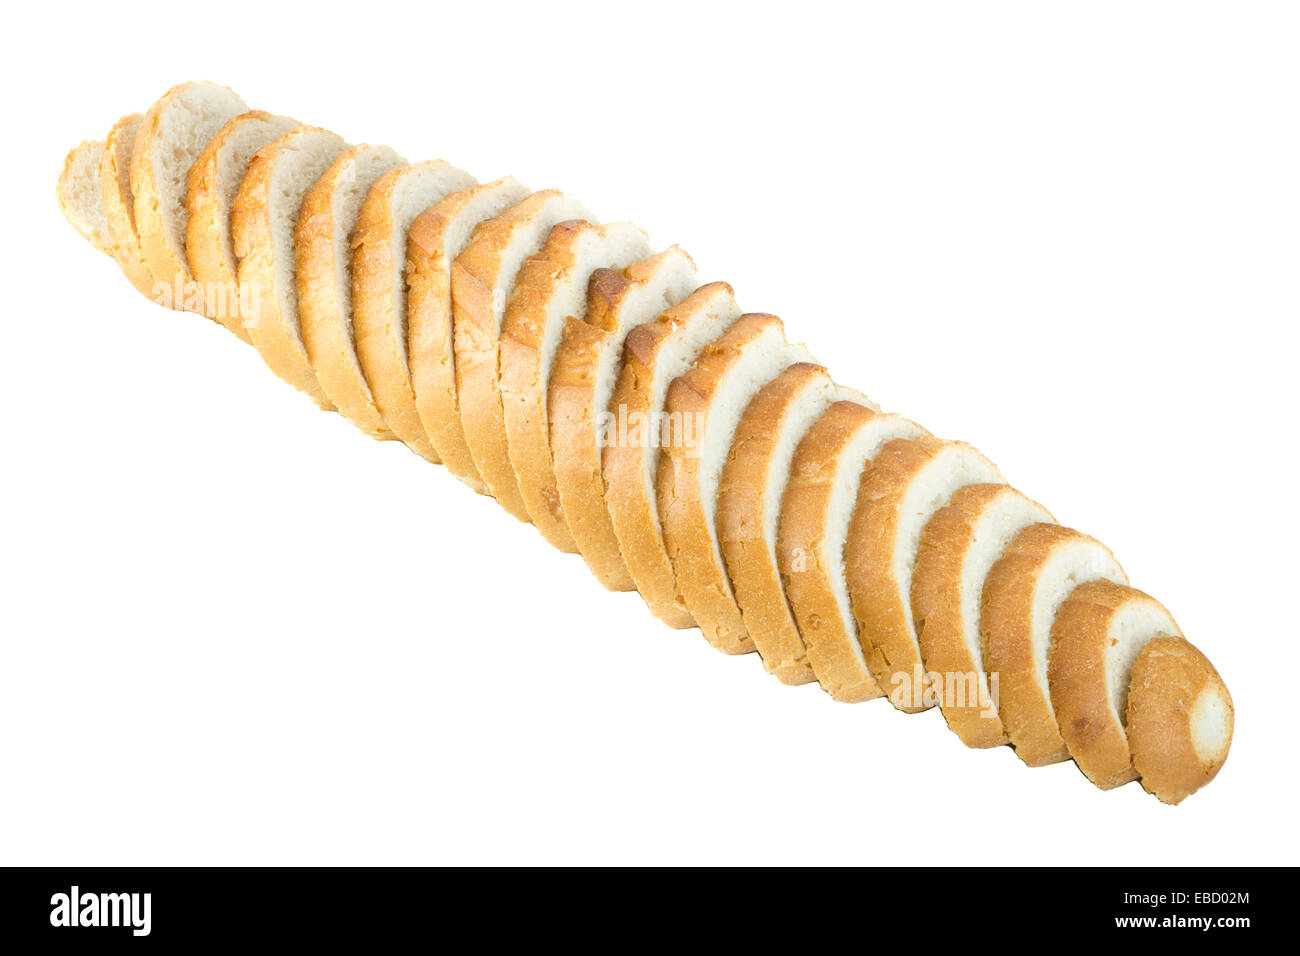 Sliced bread. Isolated on a white background Stock Photo